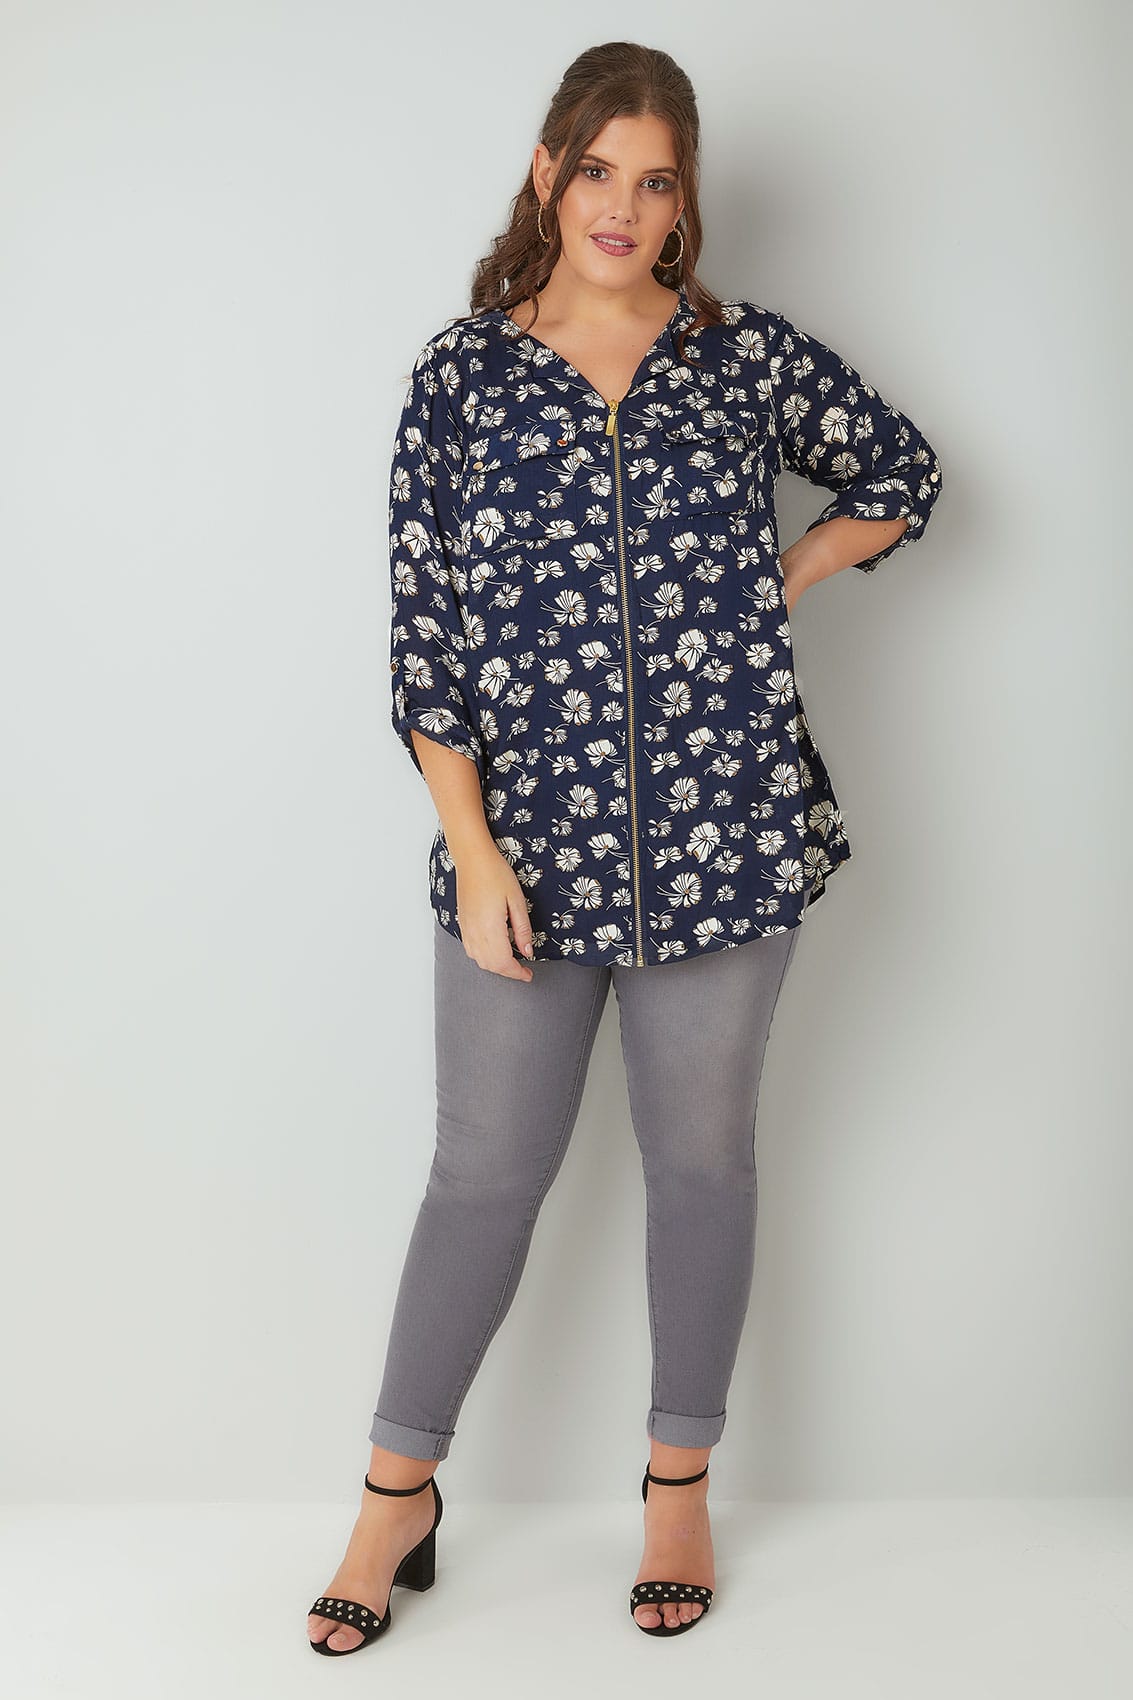 Navy & Multi Floral Print Blouse With Zip Front, Plus size 16 to 32